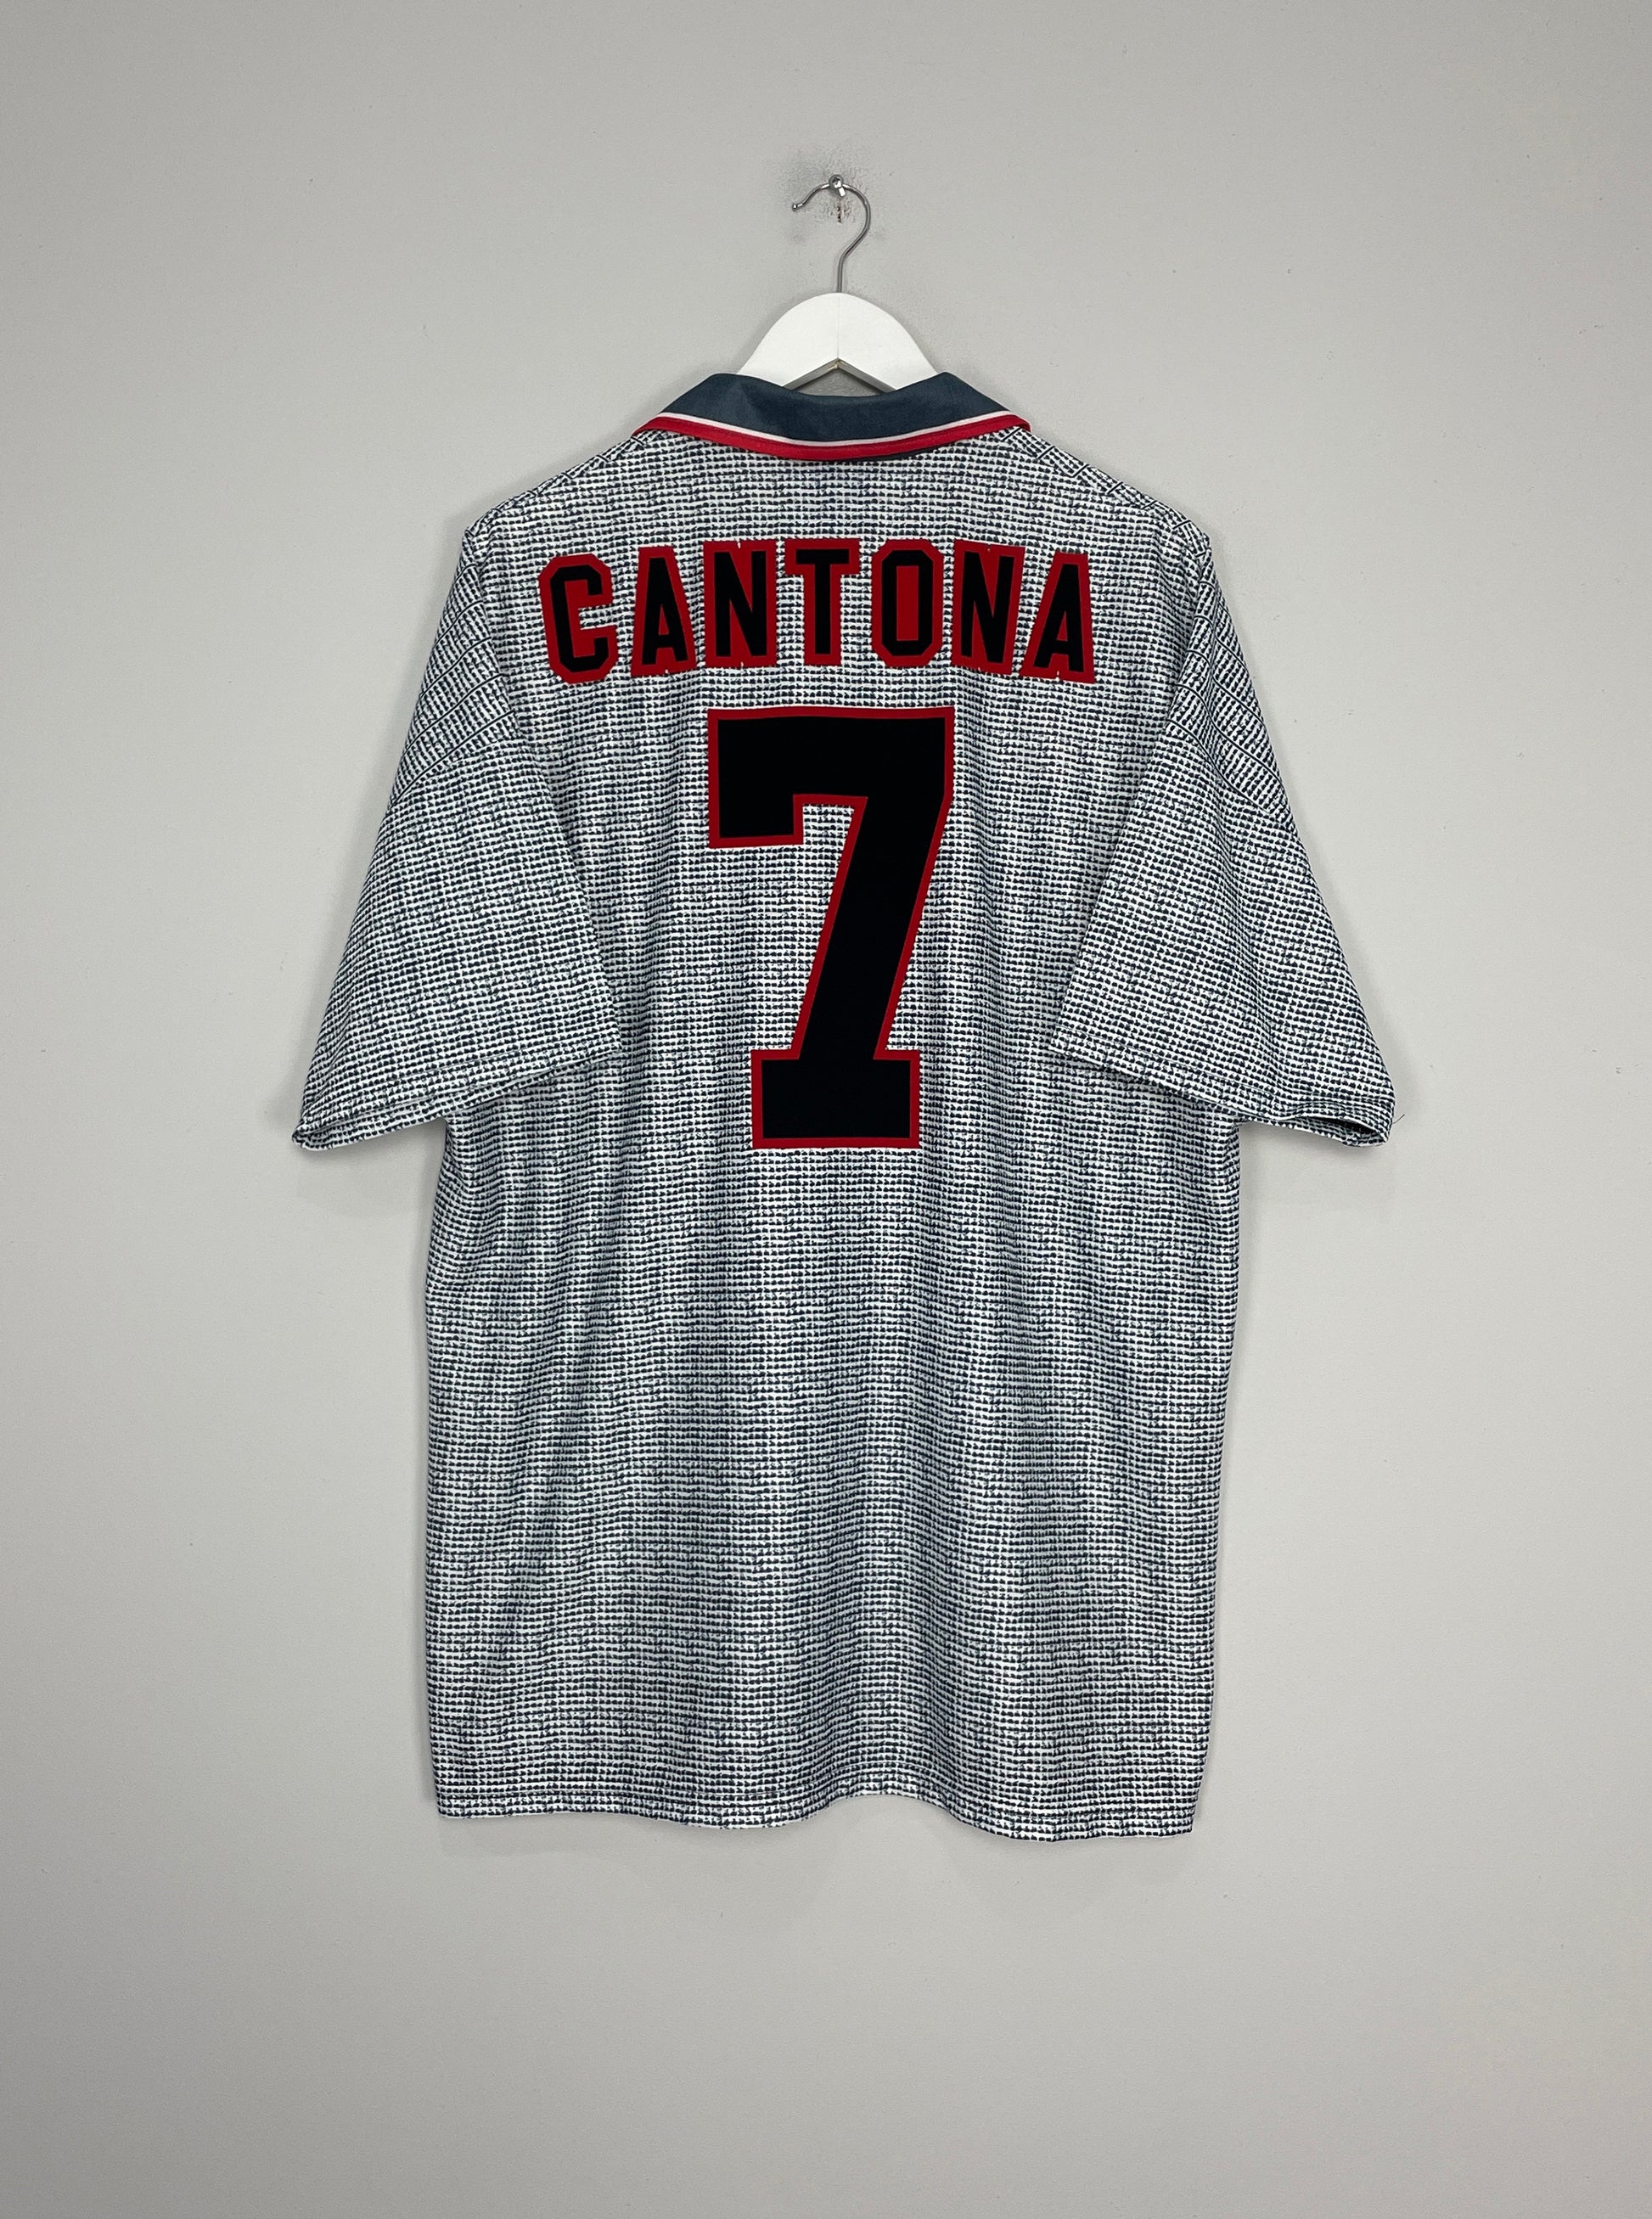 Image of the Manchester United Cantona shirt from the 1995/96 season